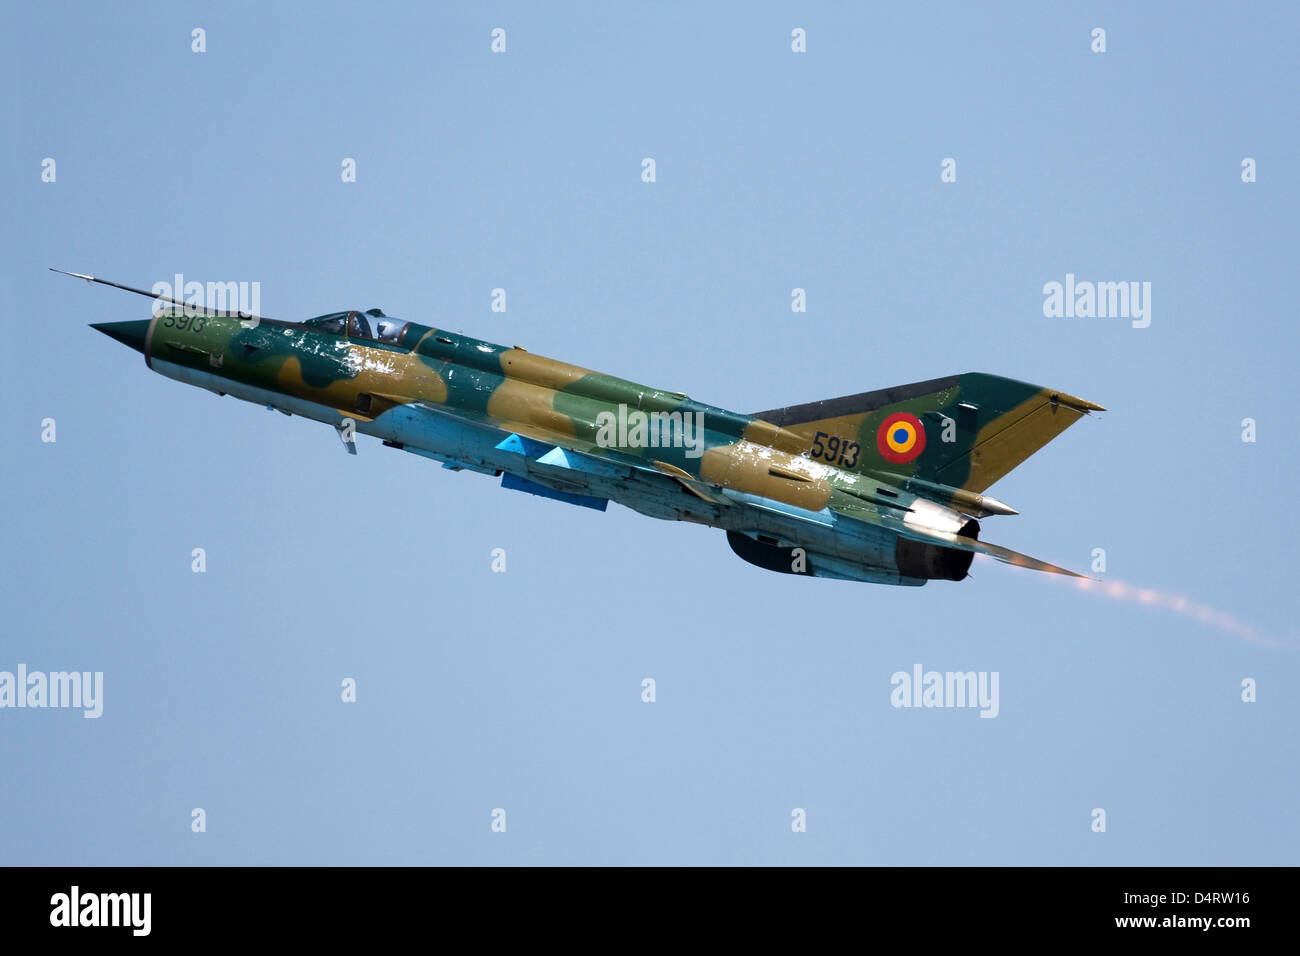 Romanian Air Force MiG-21 MF LanceR-A with afterburner during Otopeni Air Show 2010 in Bucharest, Romania. Stock Photo